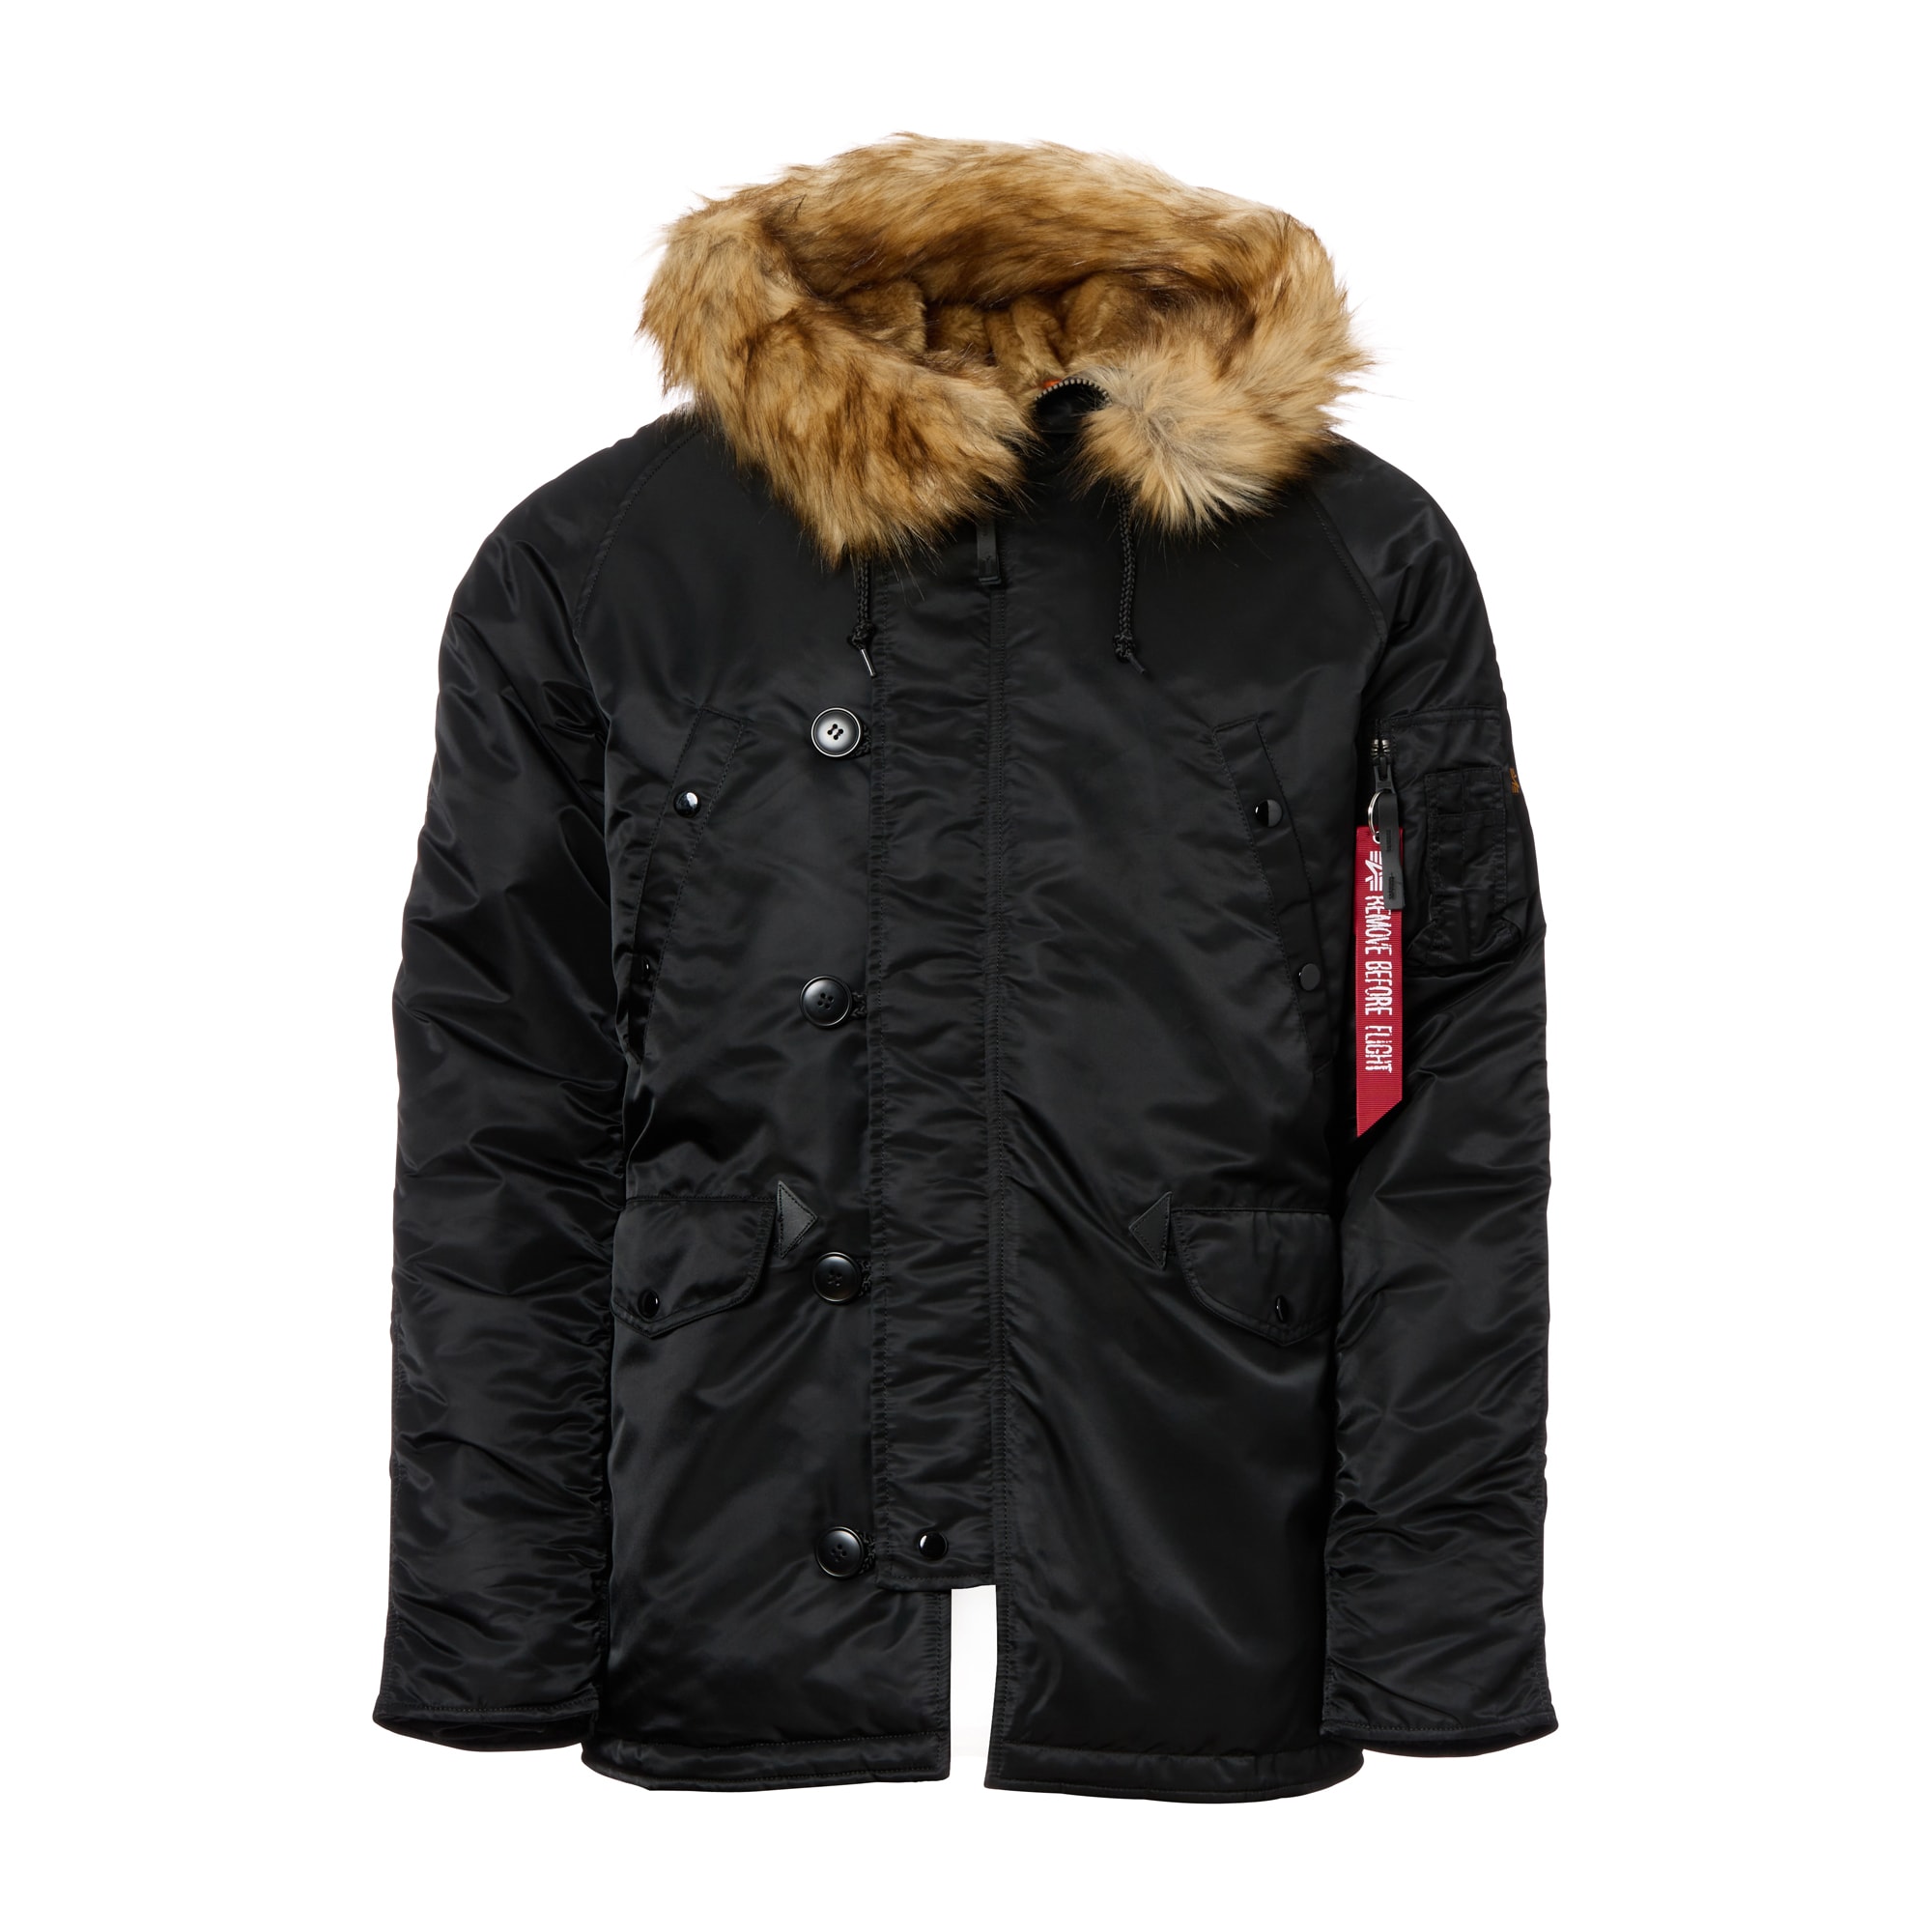 Purchase the Alpha Industries Winter Jacket N-3B VF 59 black by